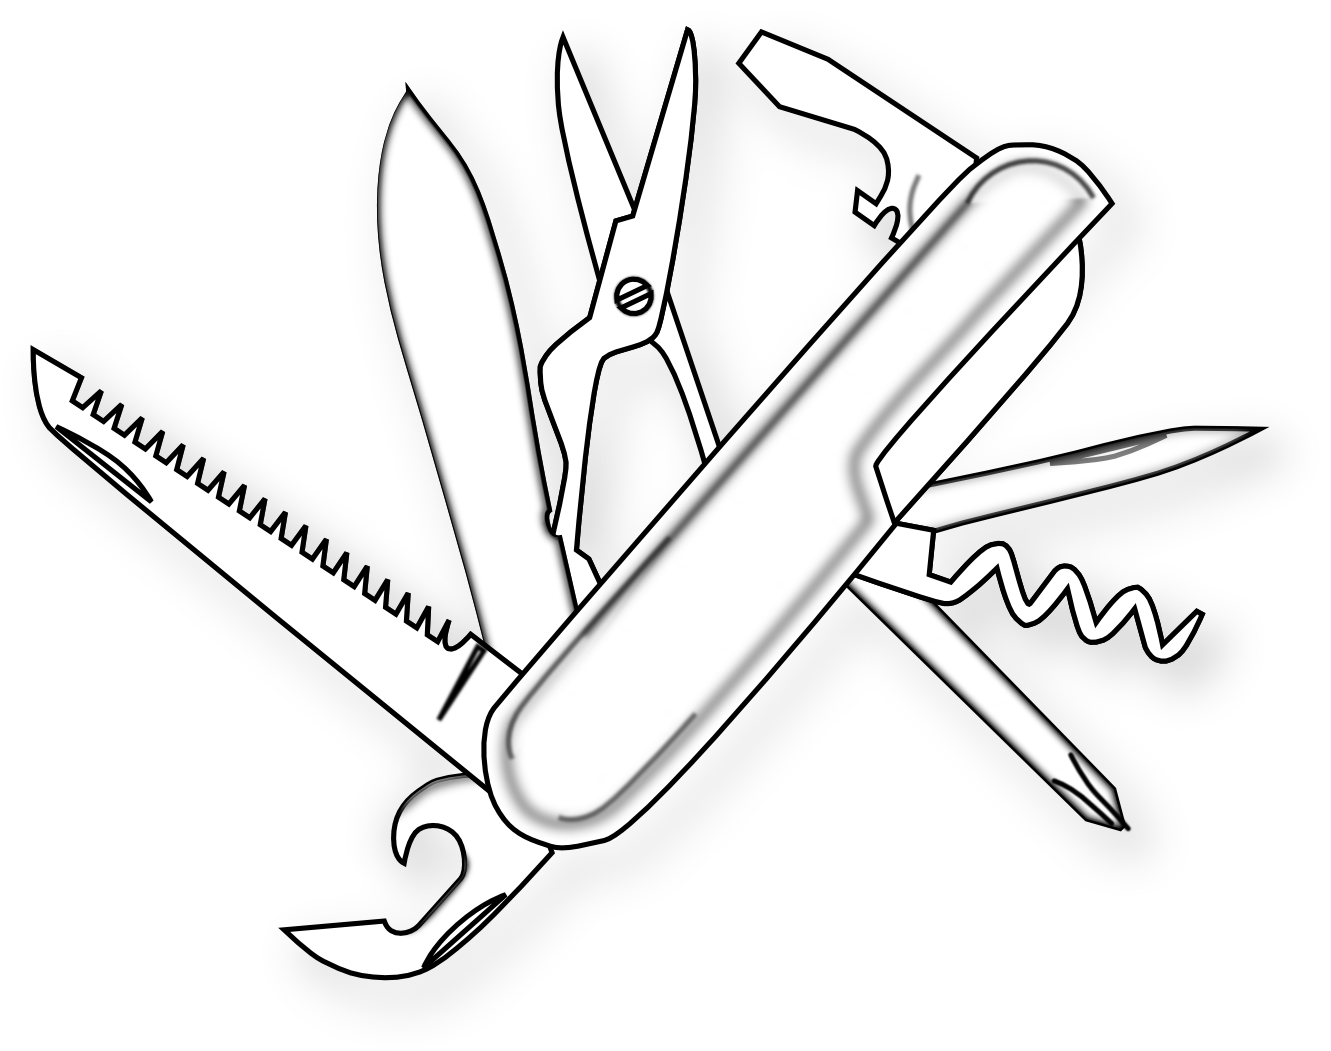 Knife clipart coloring page, Picture #1488331 knife clipart ...